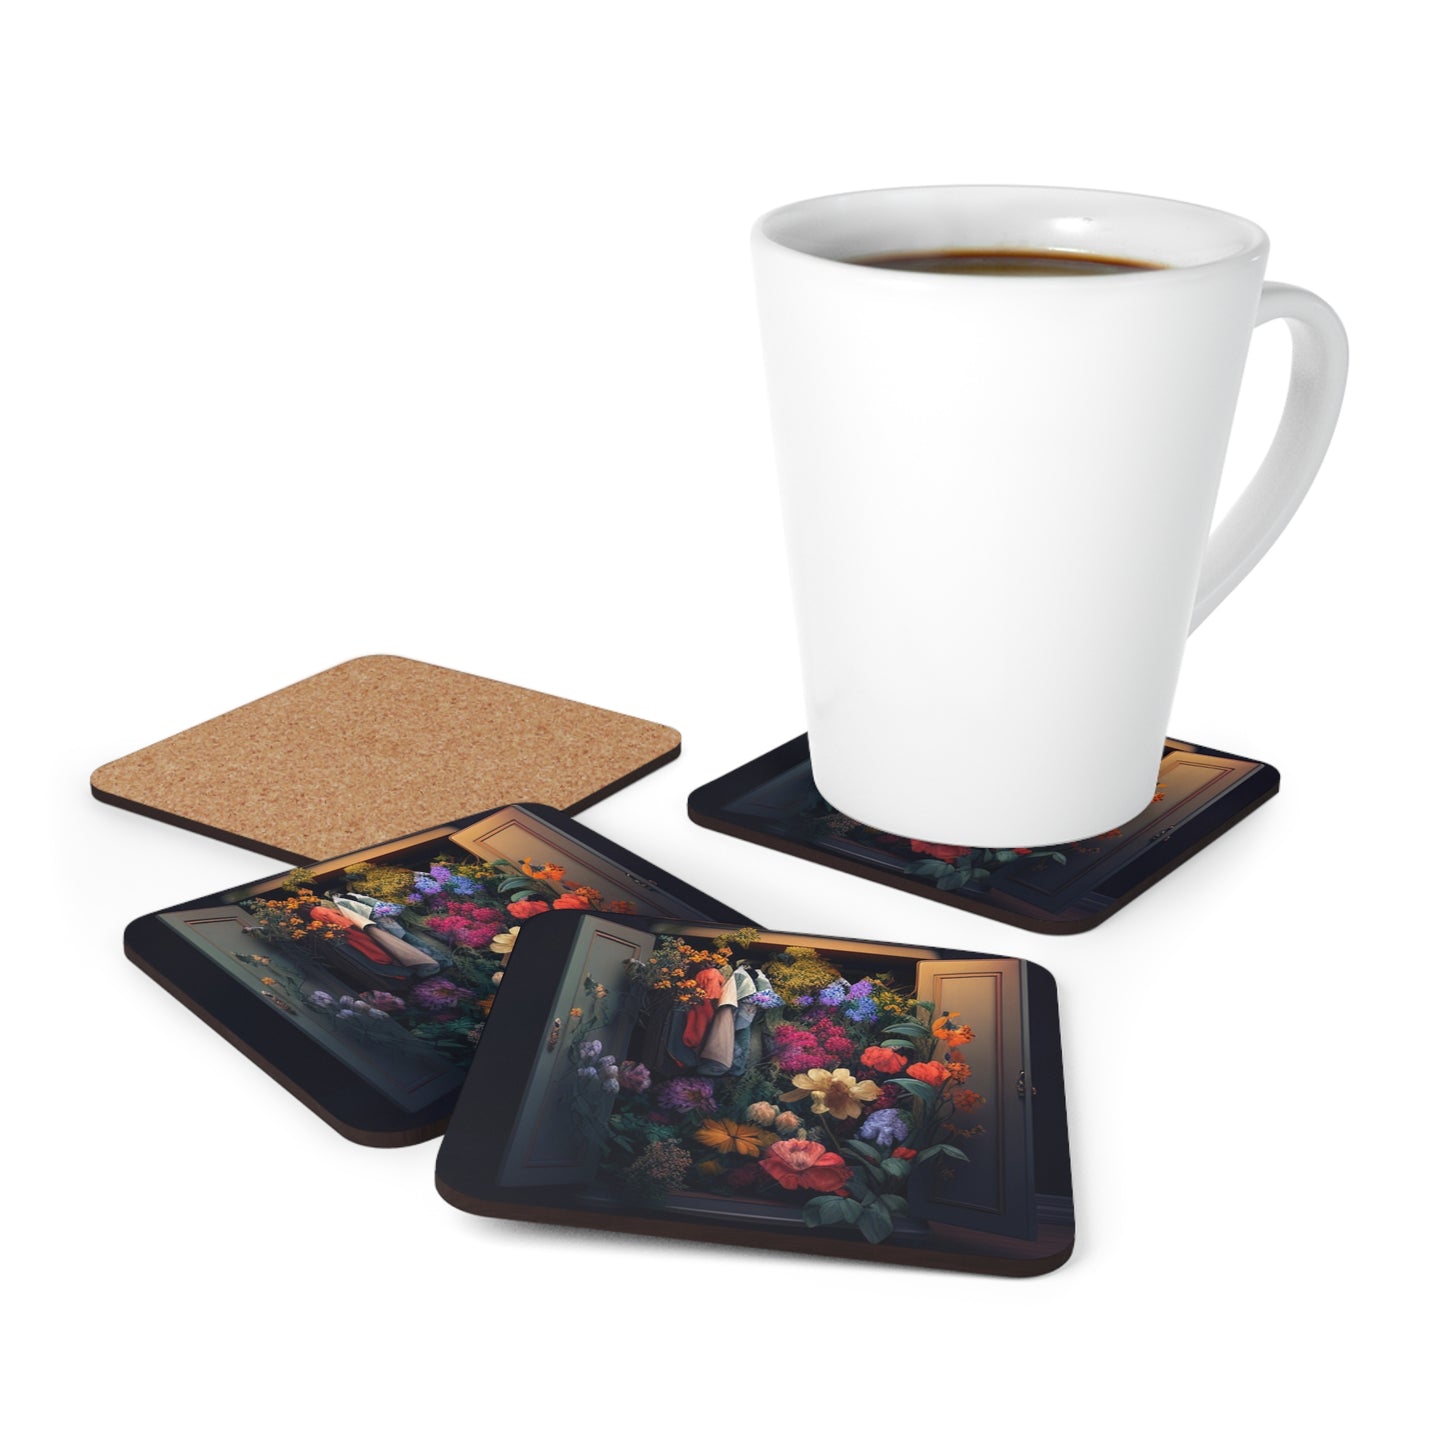 Corkwood Coaster Set A Wardrobe Surrounded by Flowers 4